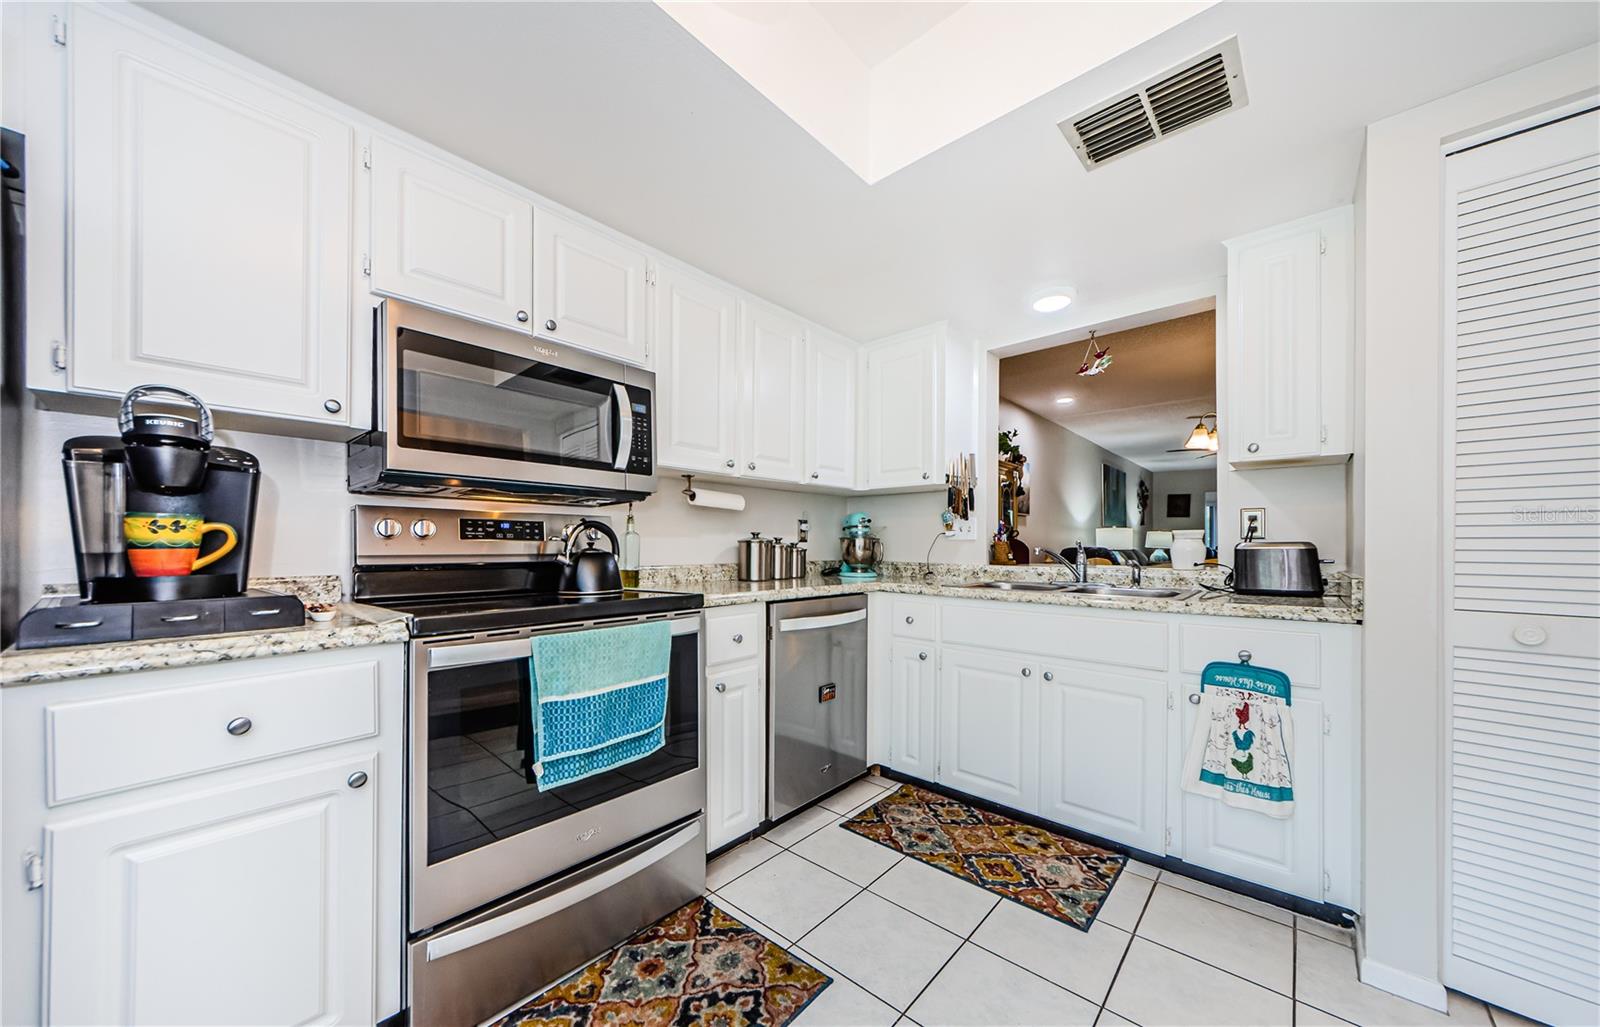 Stainless Steel Appliances. Pantry on the Right. Kitchen Opens to Dining & Living Room Beyond. Perfect if You're Hosting and Don't Want to Miss Out on the Revelry.